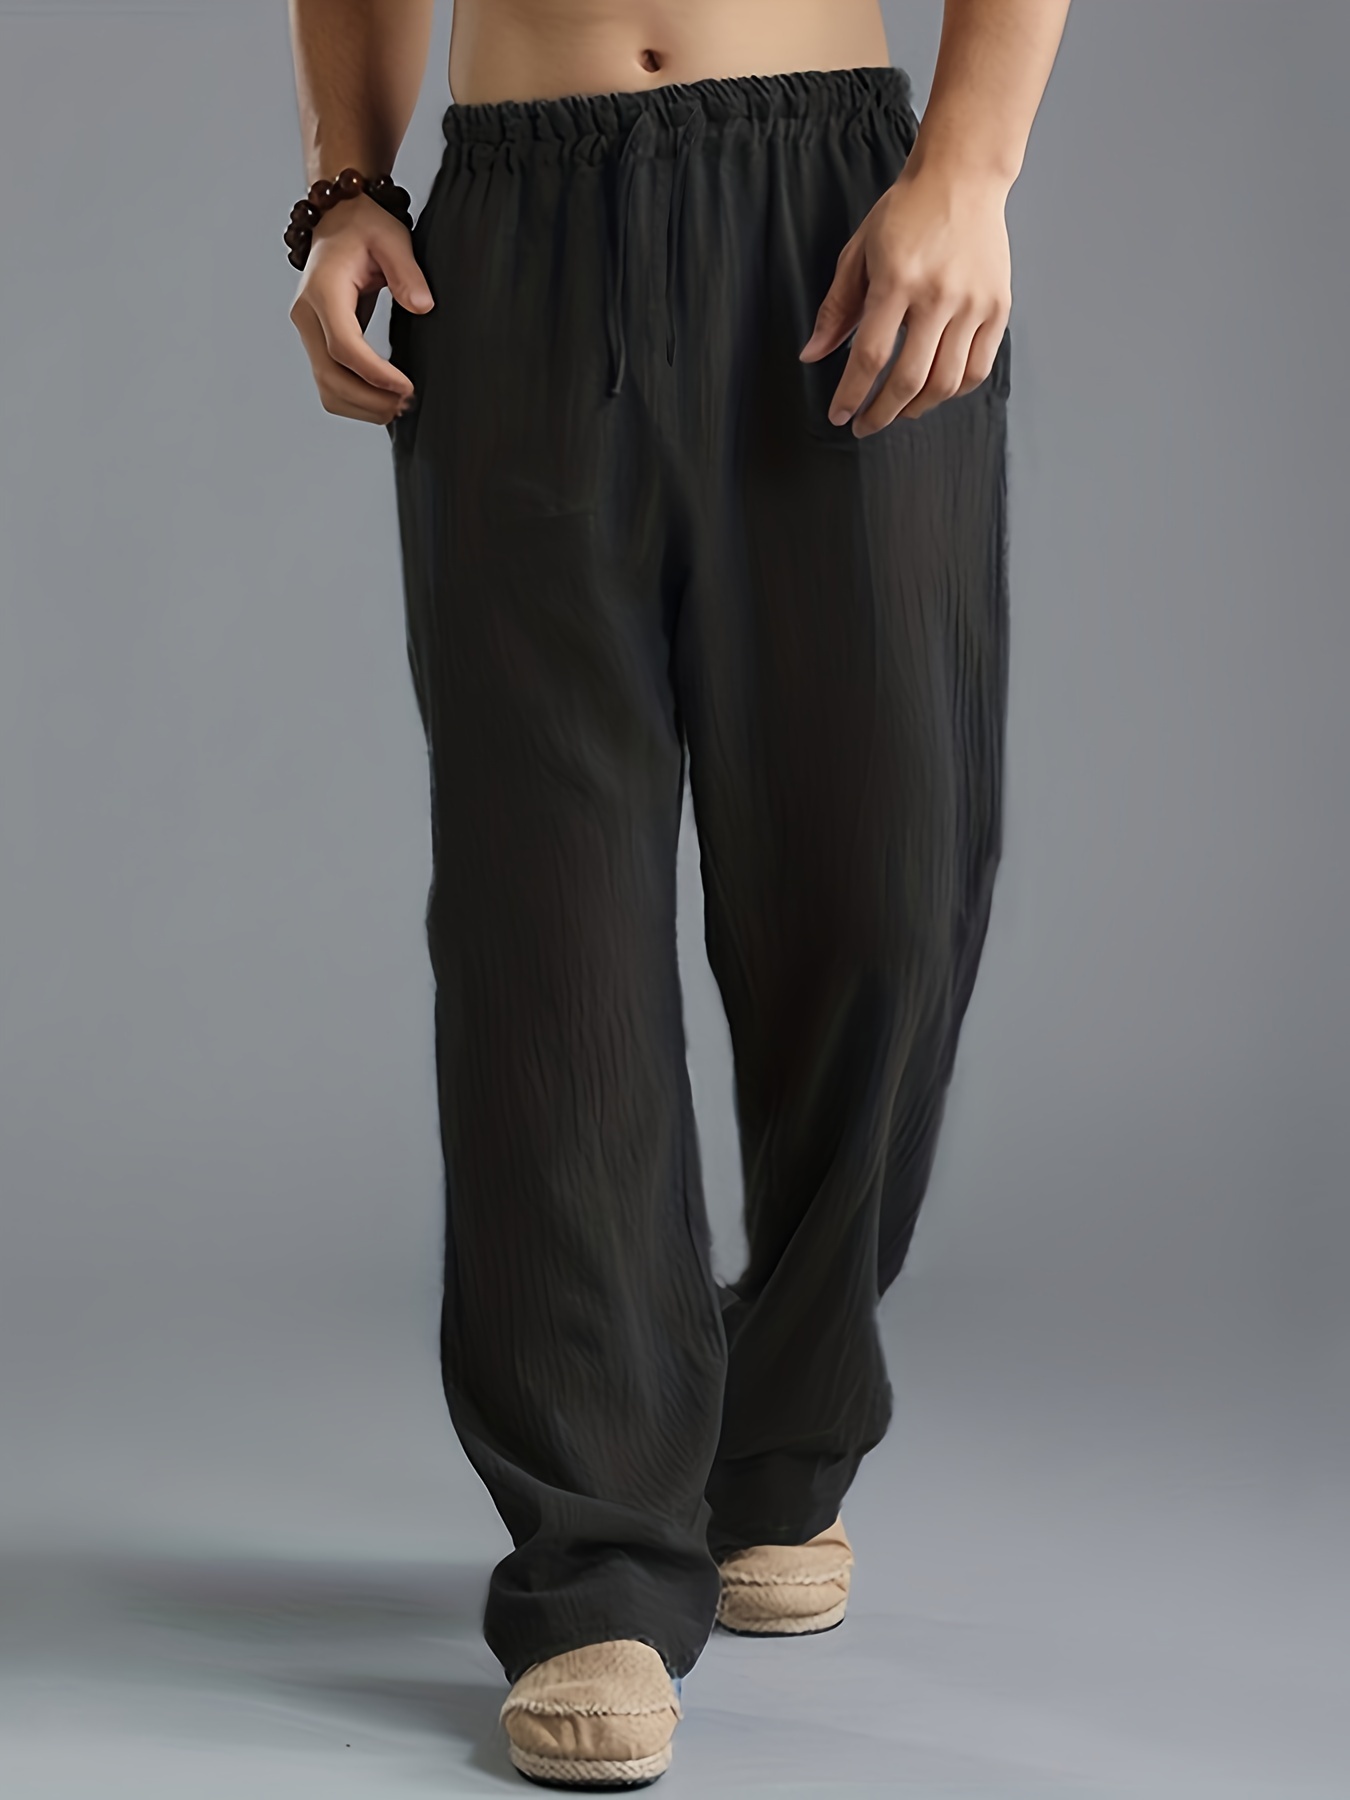 Comfy Tapered Linen Pants Casual Summer Loose Fit Linen Joggers